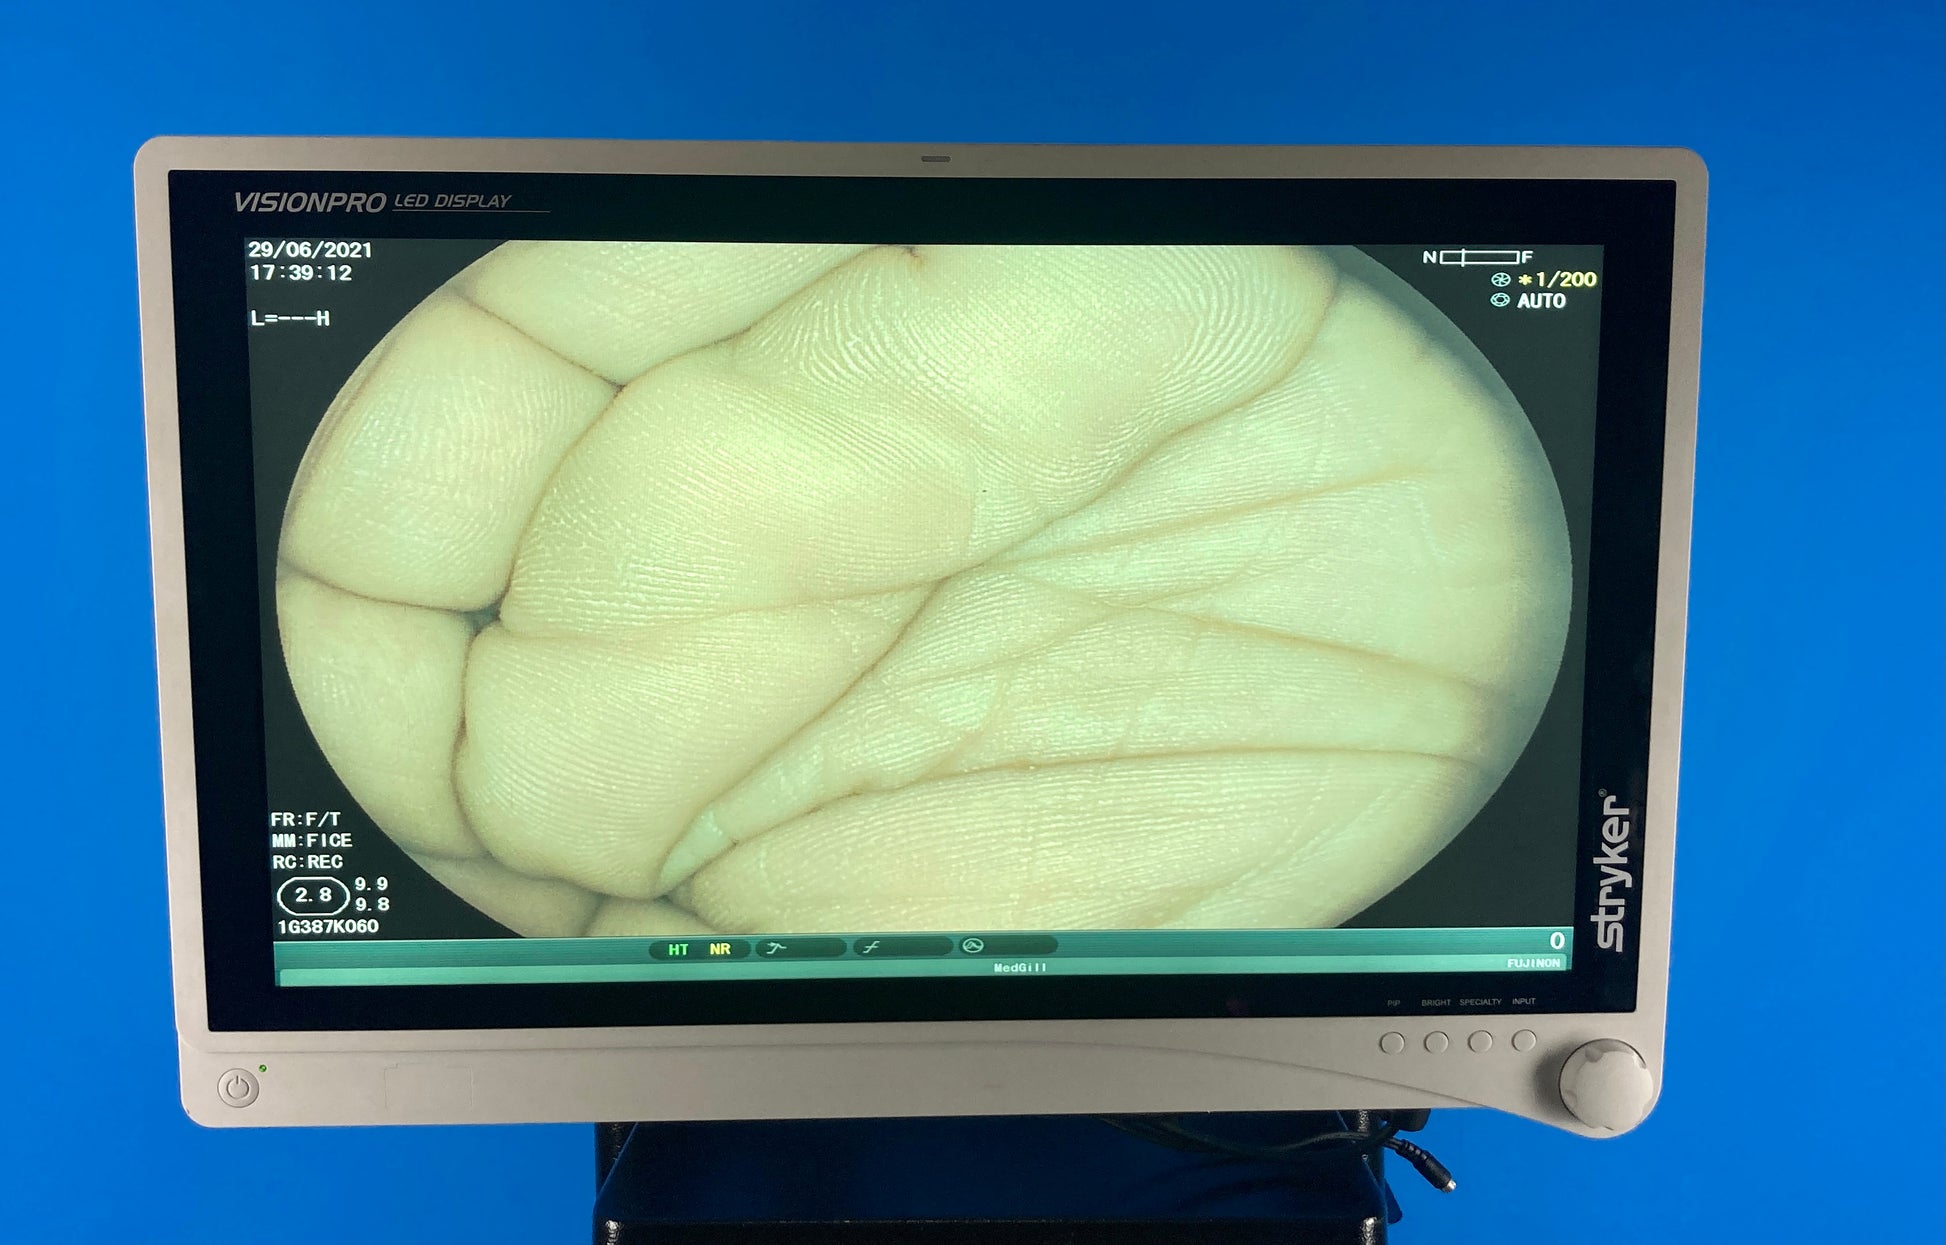 Stryker Visionpro LED Monitor Video center show the surgical Procedure 